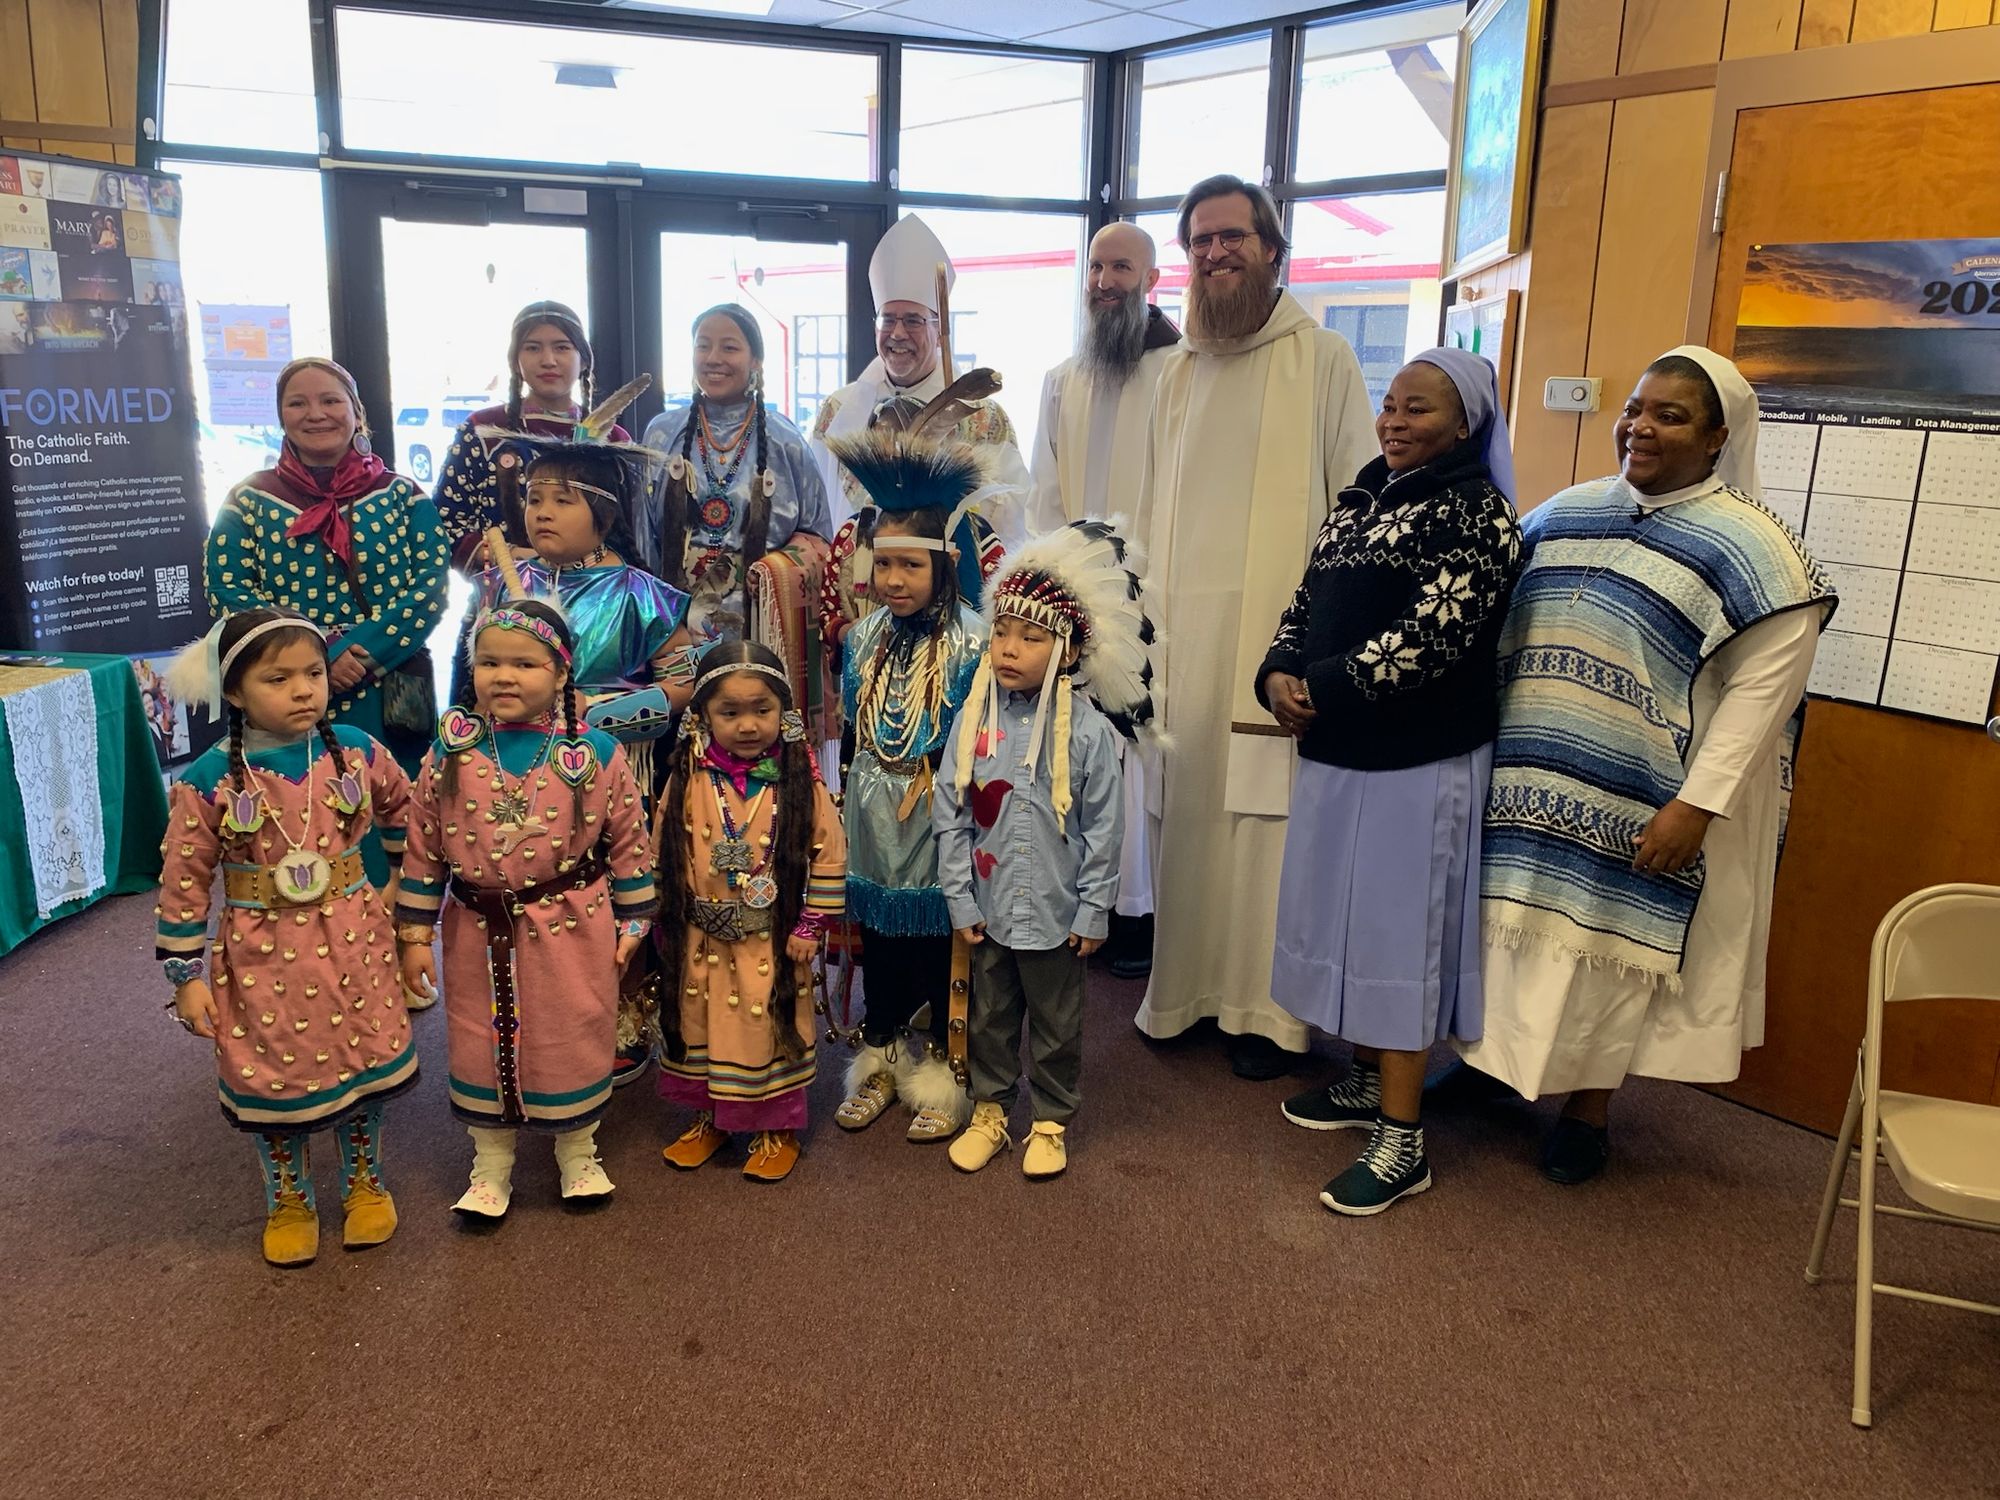 Bishop Warfel, Br. Mike Dorn and Br. Thomas Skowron along with parishioners and religious sisters in the vestibule after Mass.